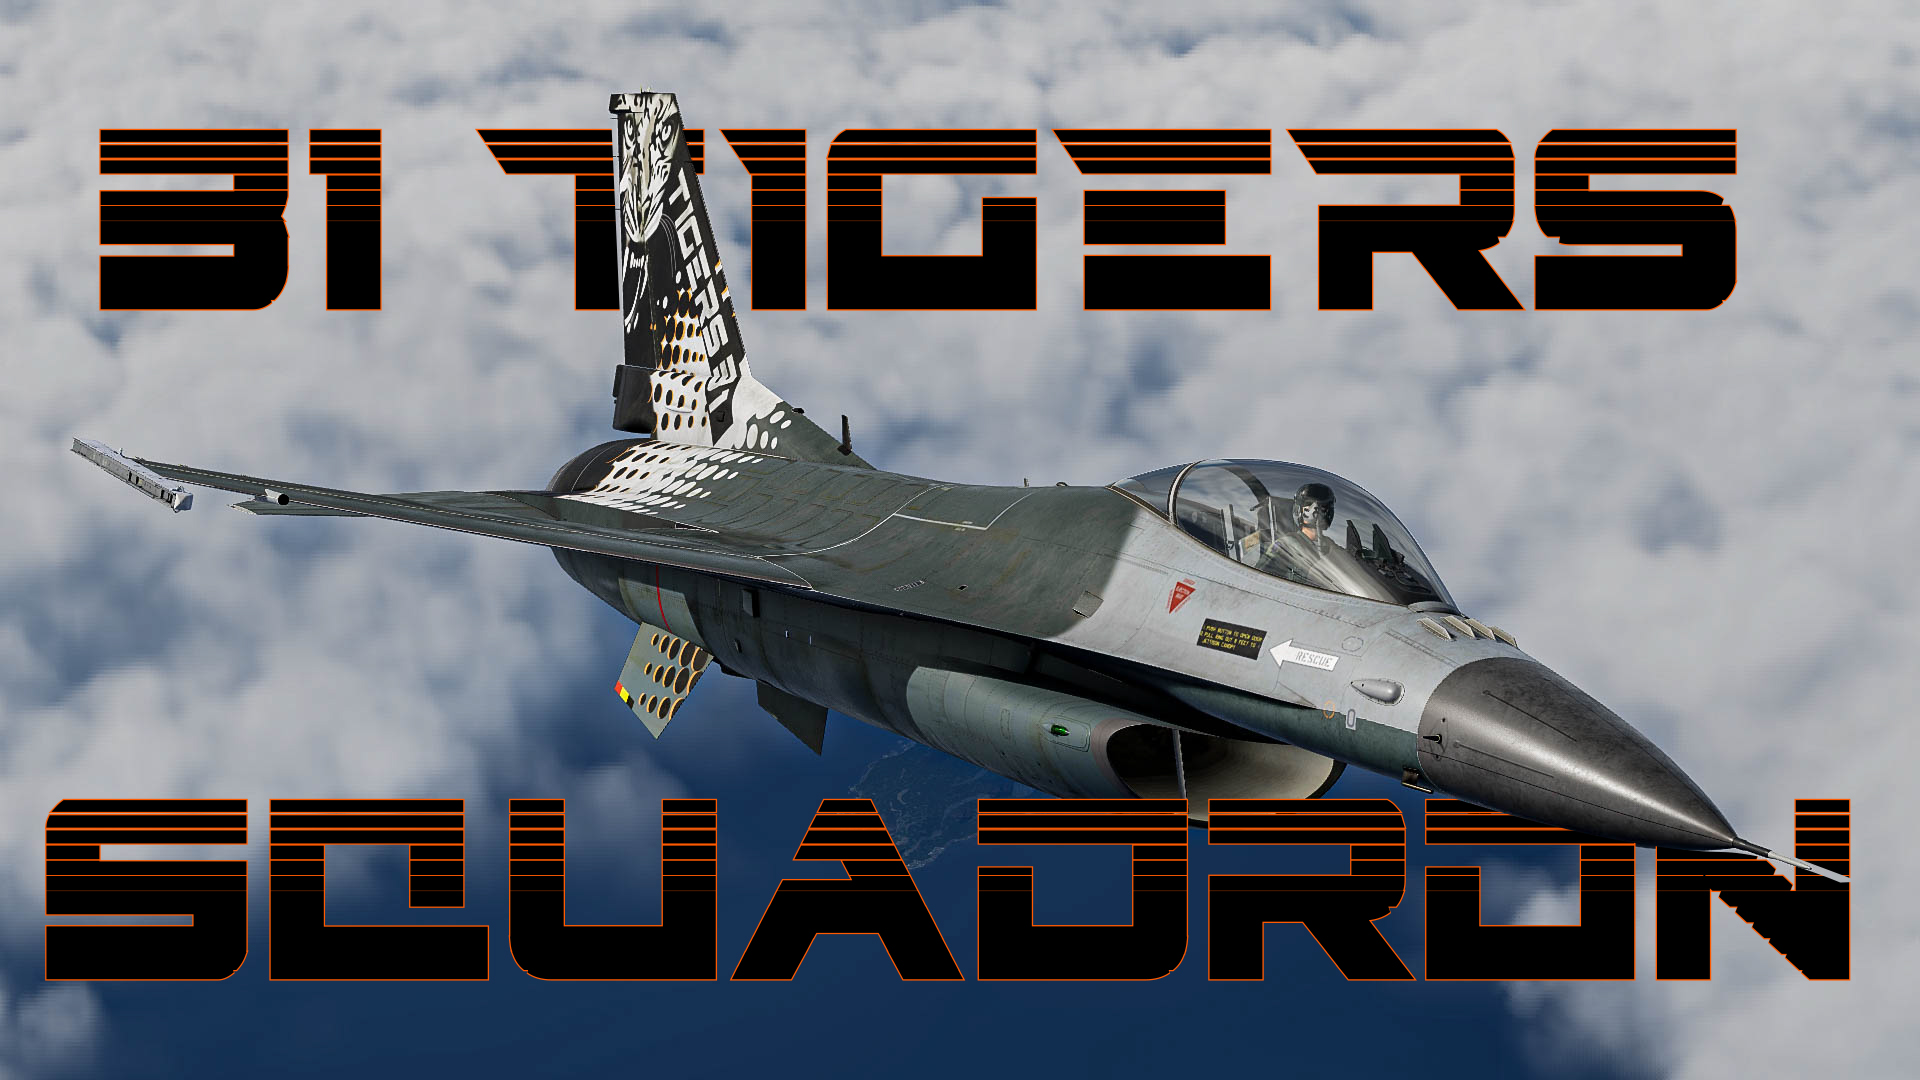 BAF 31 TIGERS SQUADRON by Sphimx